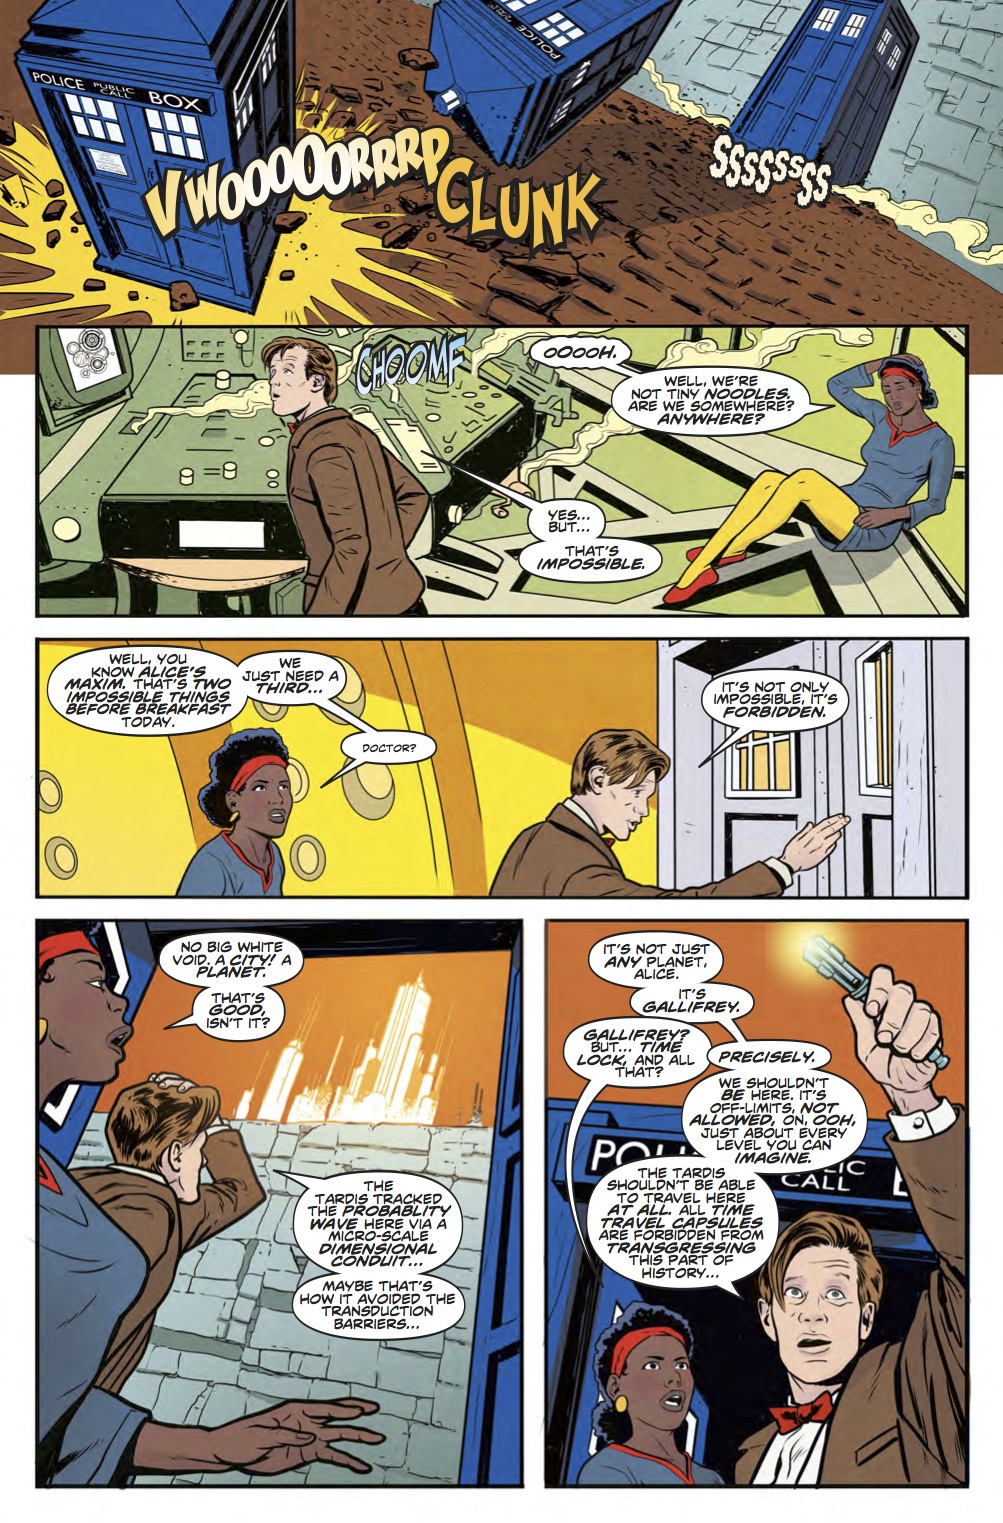 Doctor_Who_11D_3_10_Page 3